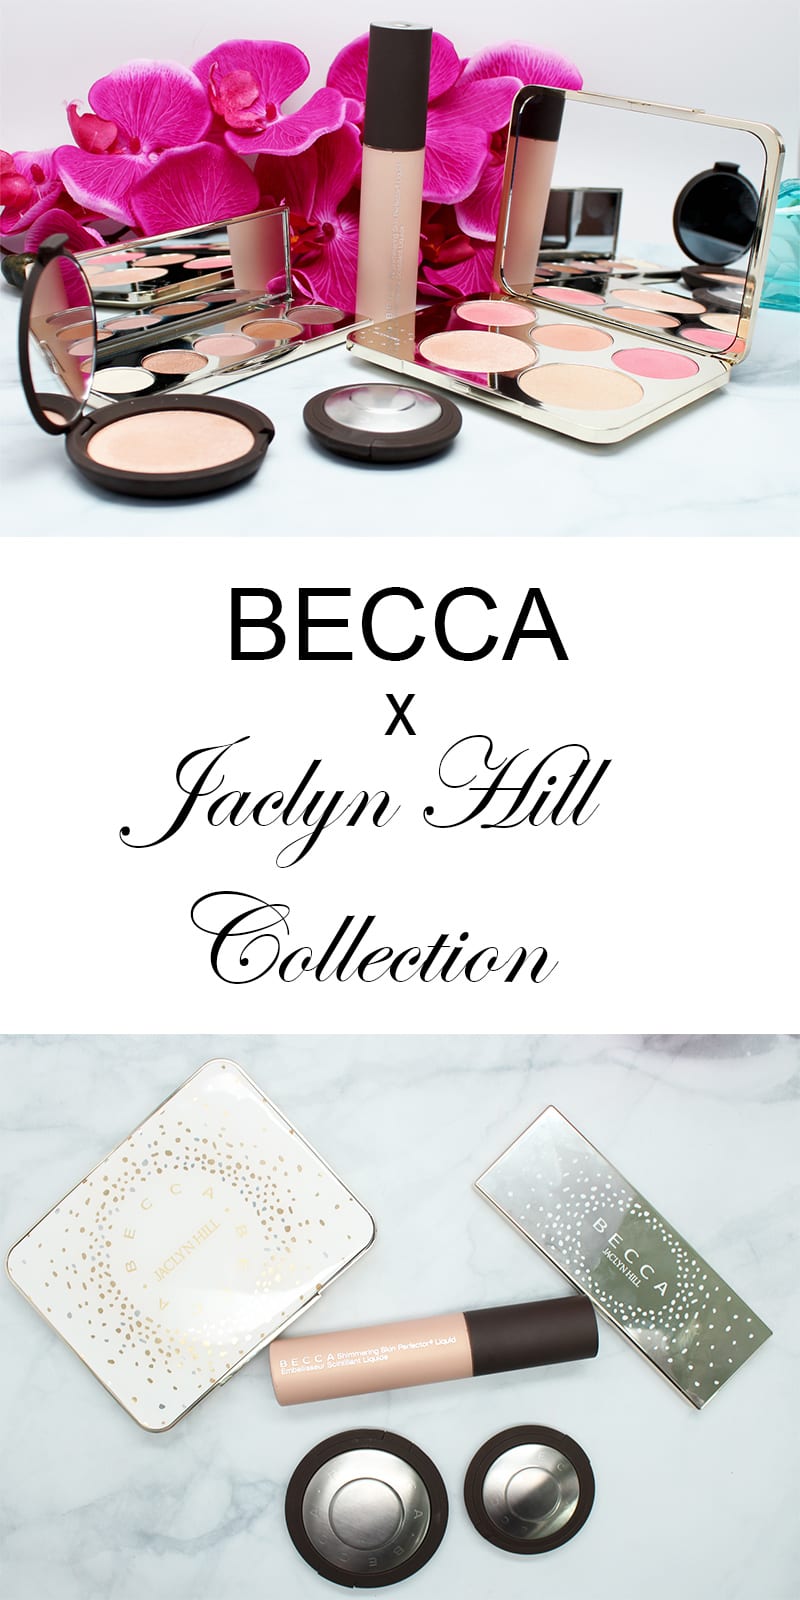 Becca x Jaclyn Hill Champagne Collection